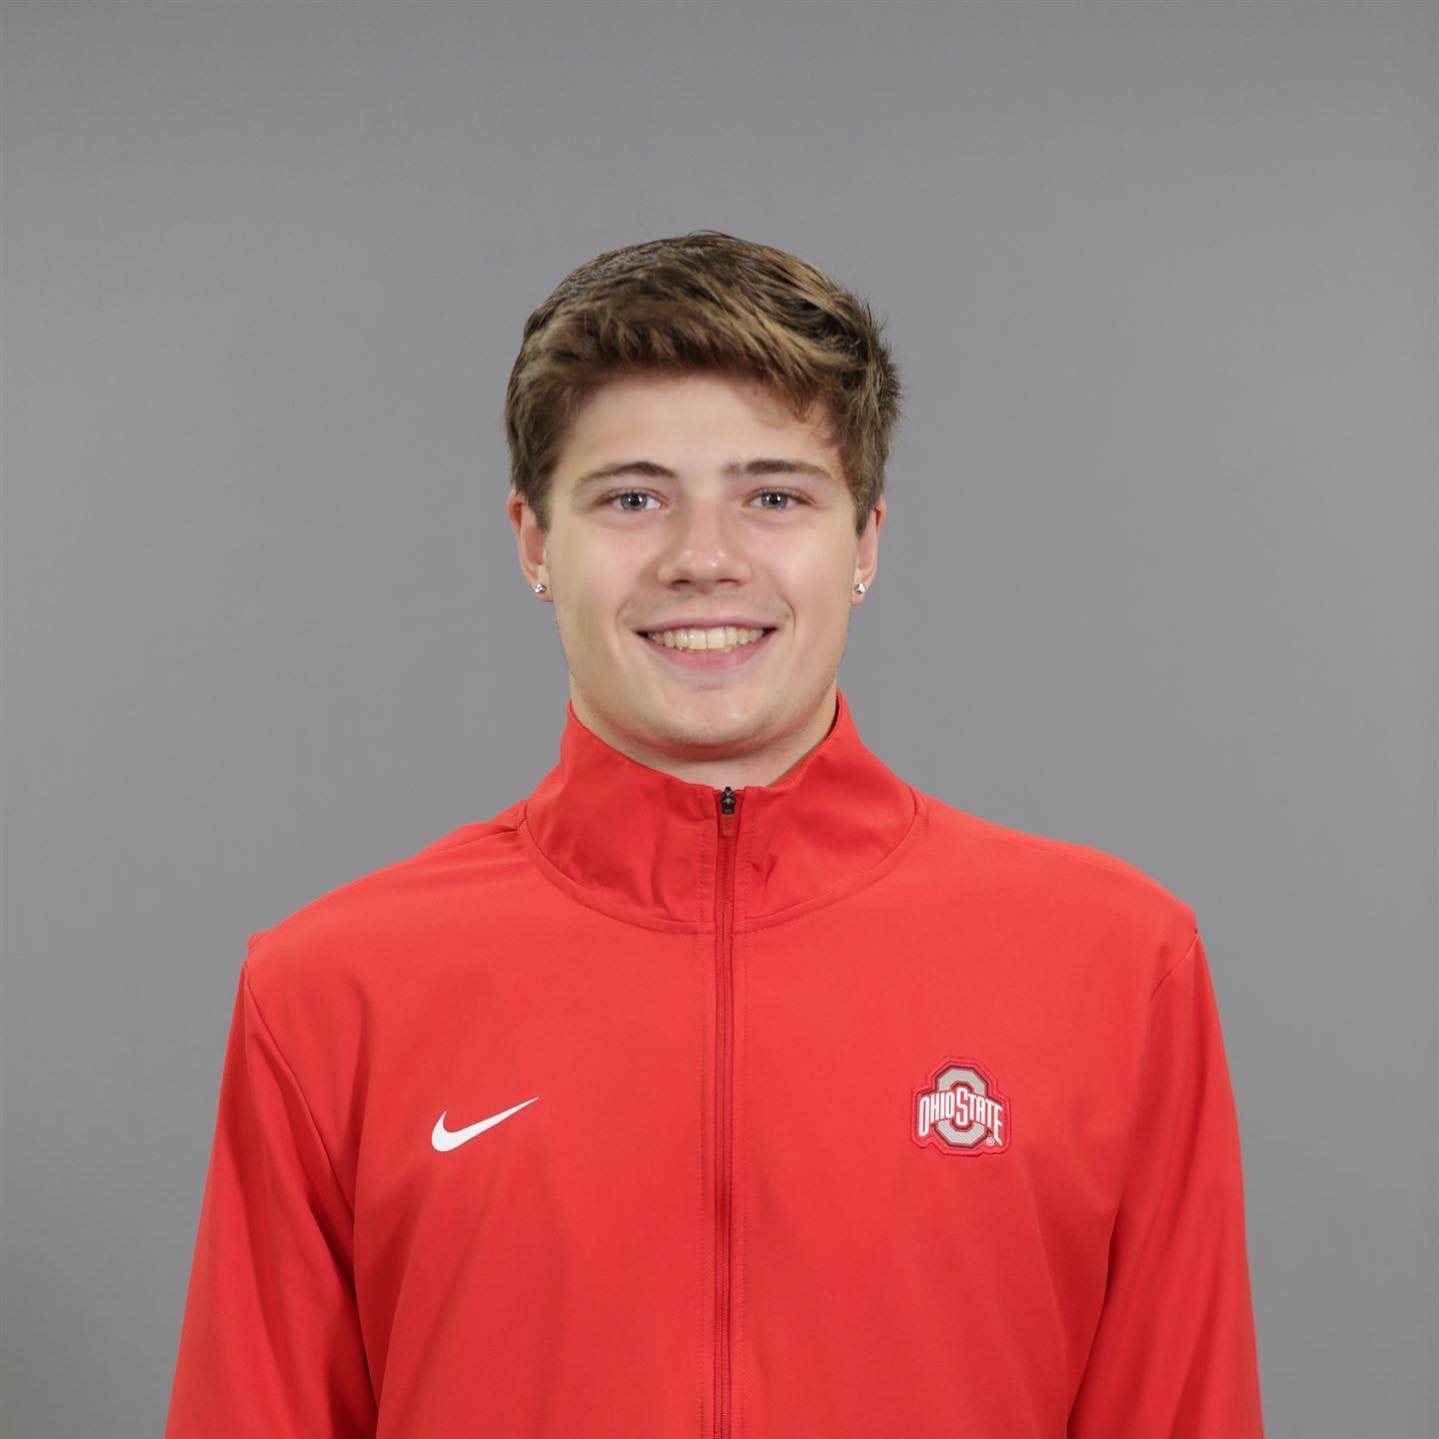 Nathan Holty is an Ohio State junior and competes on the men’s swim team.